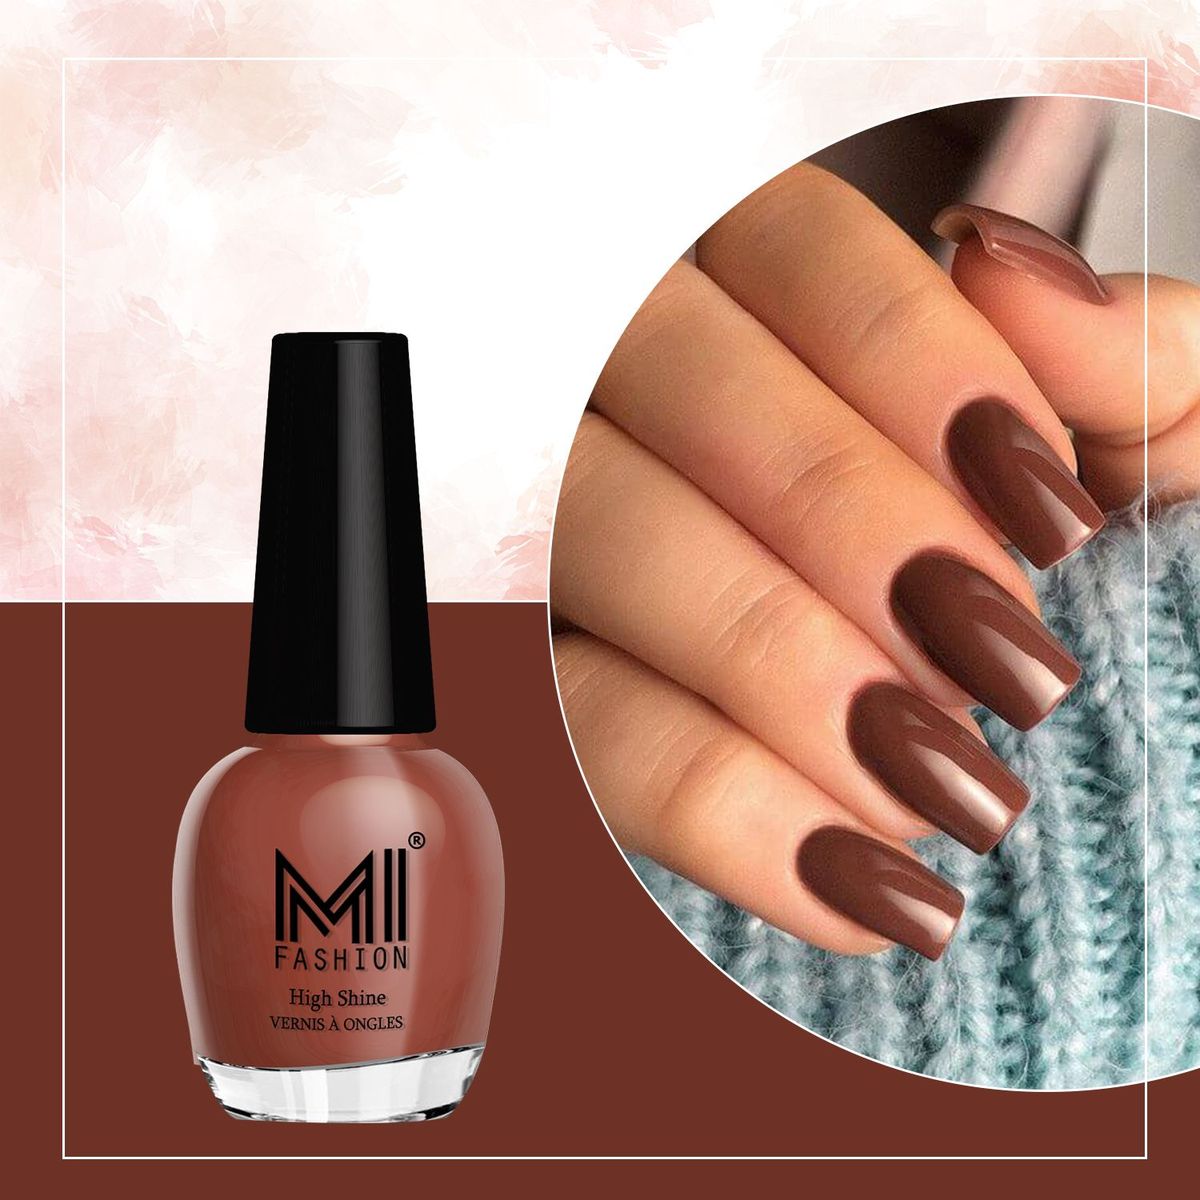 Buy Swiss Beauty Slay Nail Color | Glossy Finish, Long Lasting Nail Paint|  Chip resistant, Quick drying Nail Polish | Shade- Hot Chocolate, 25Ml  Online at Low Prices in India - Amazon.in